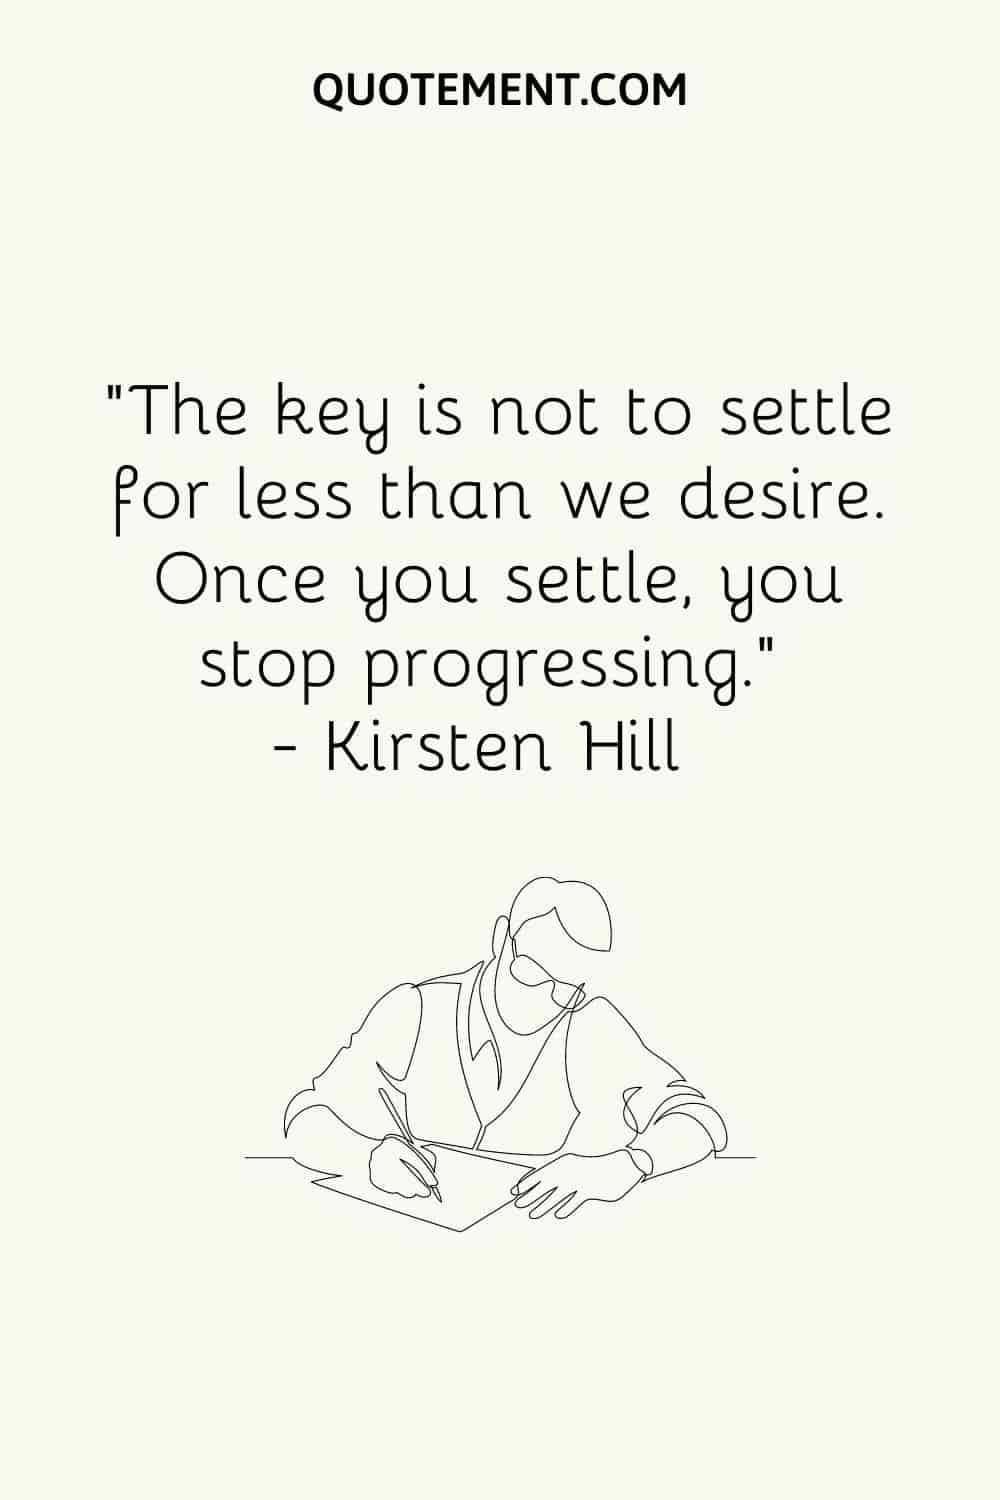 The key is not to settle for less than we desire.